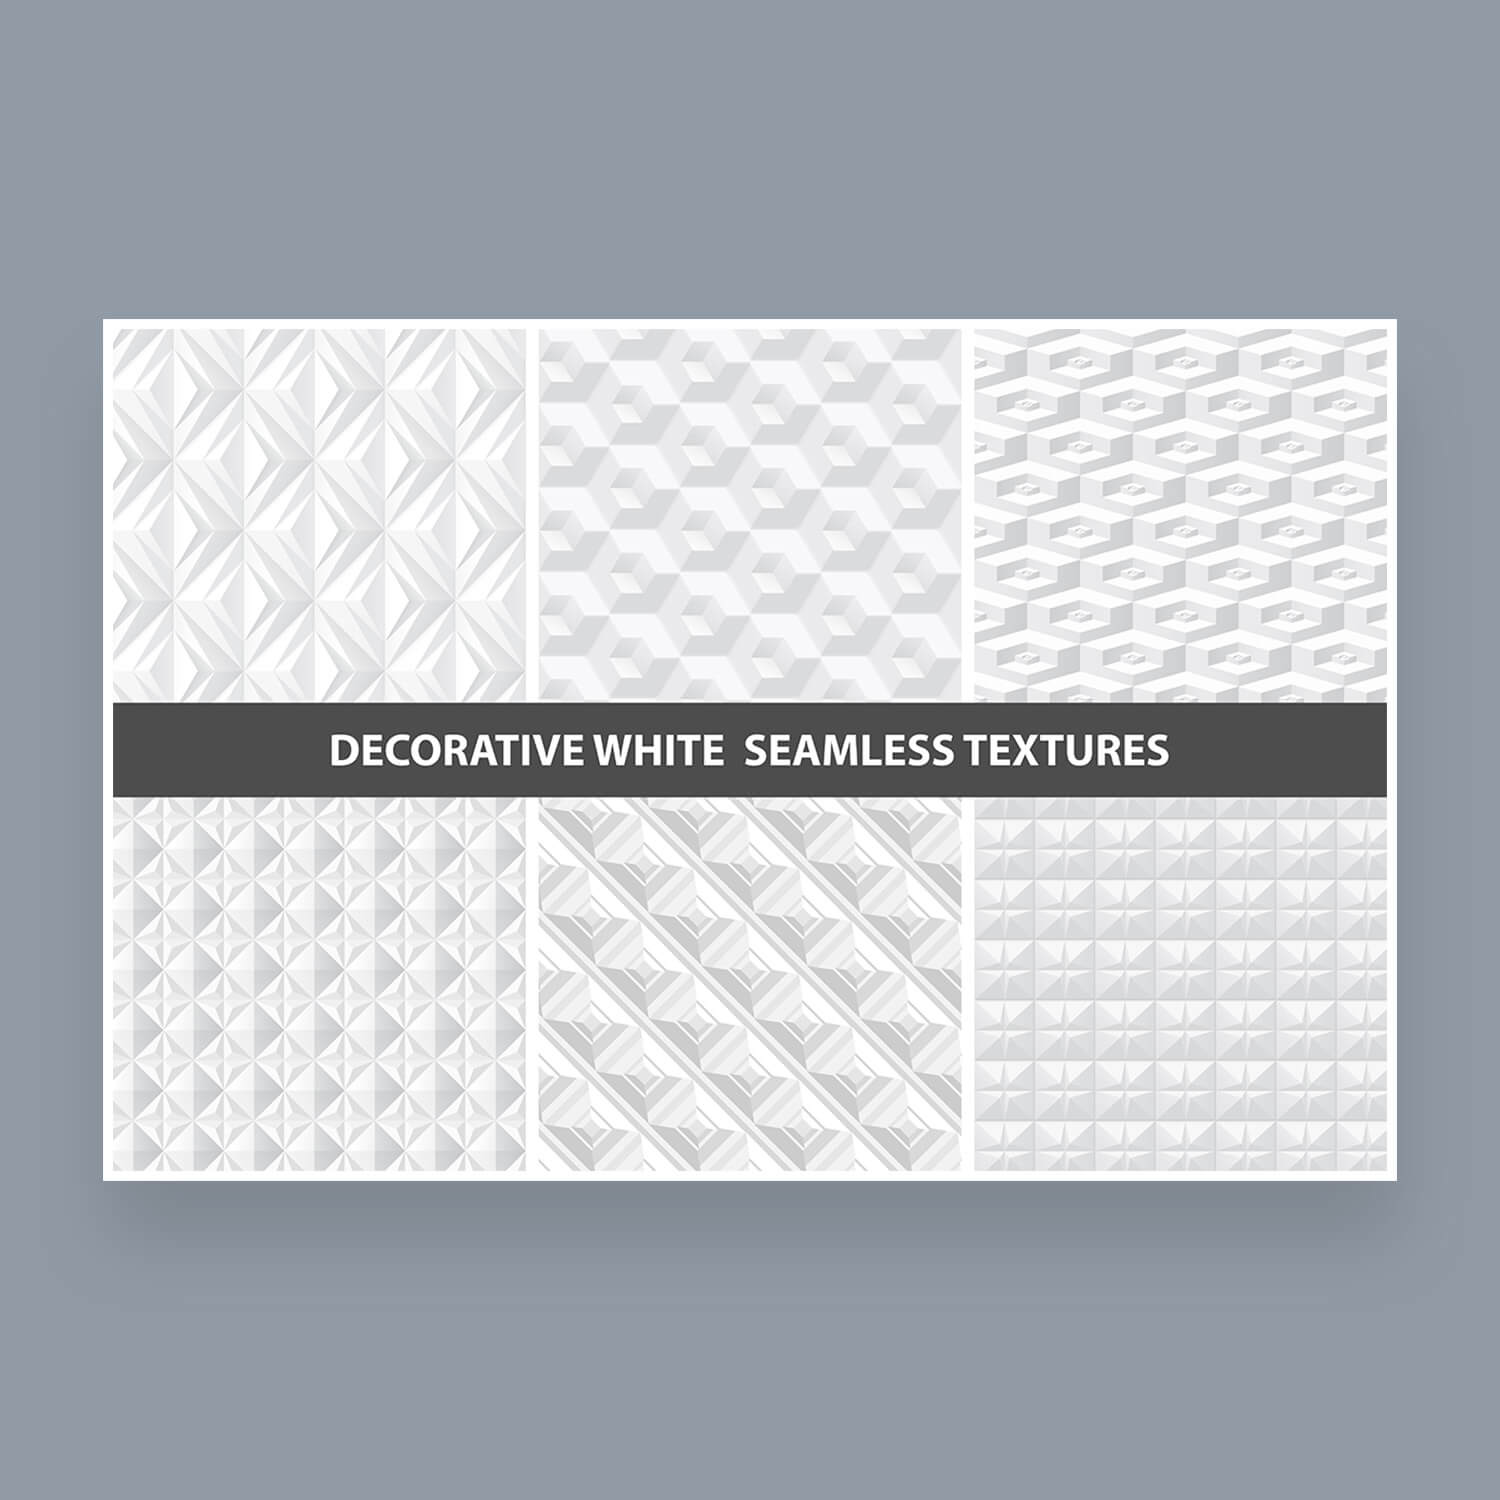 white geometric 3d seamless textures cover image.